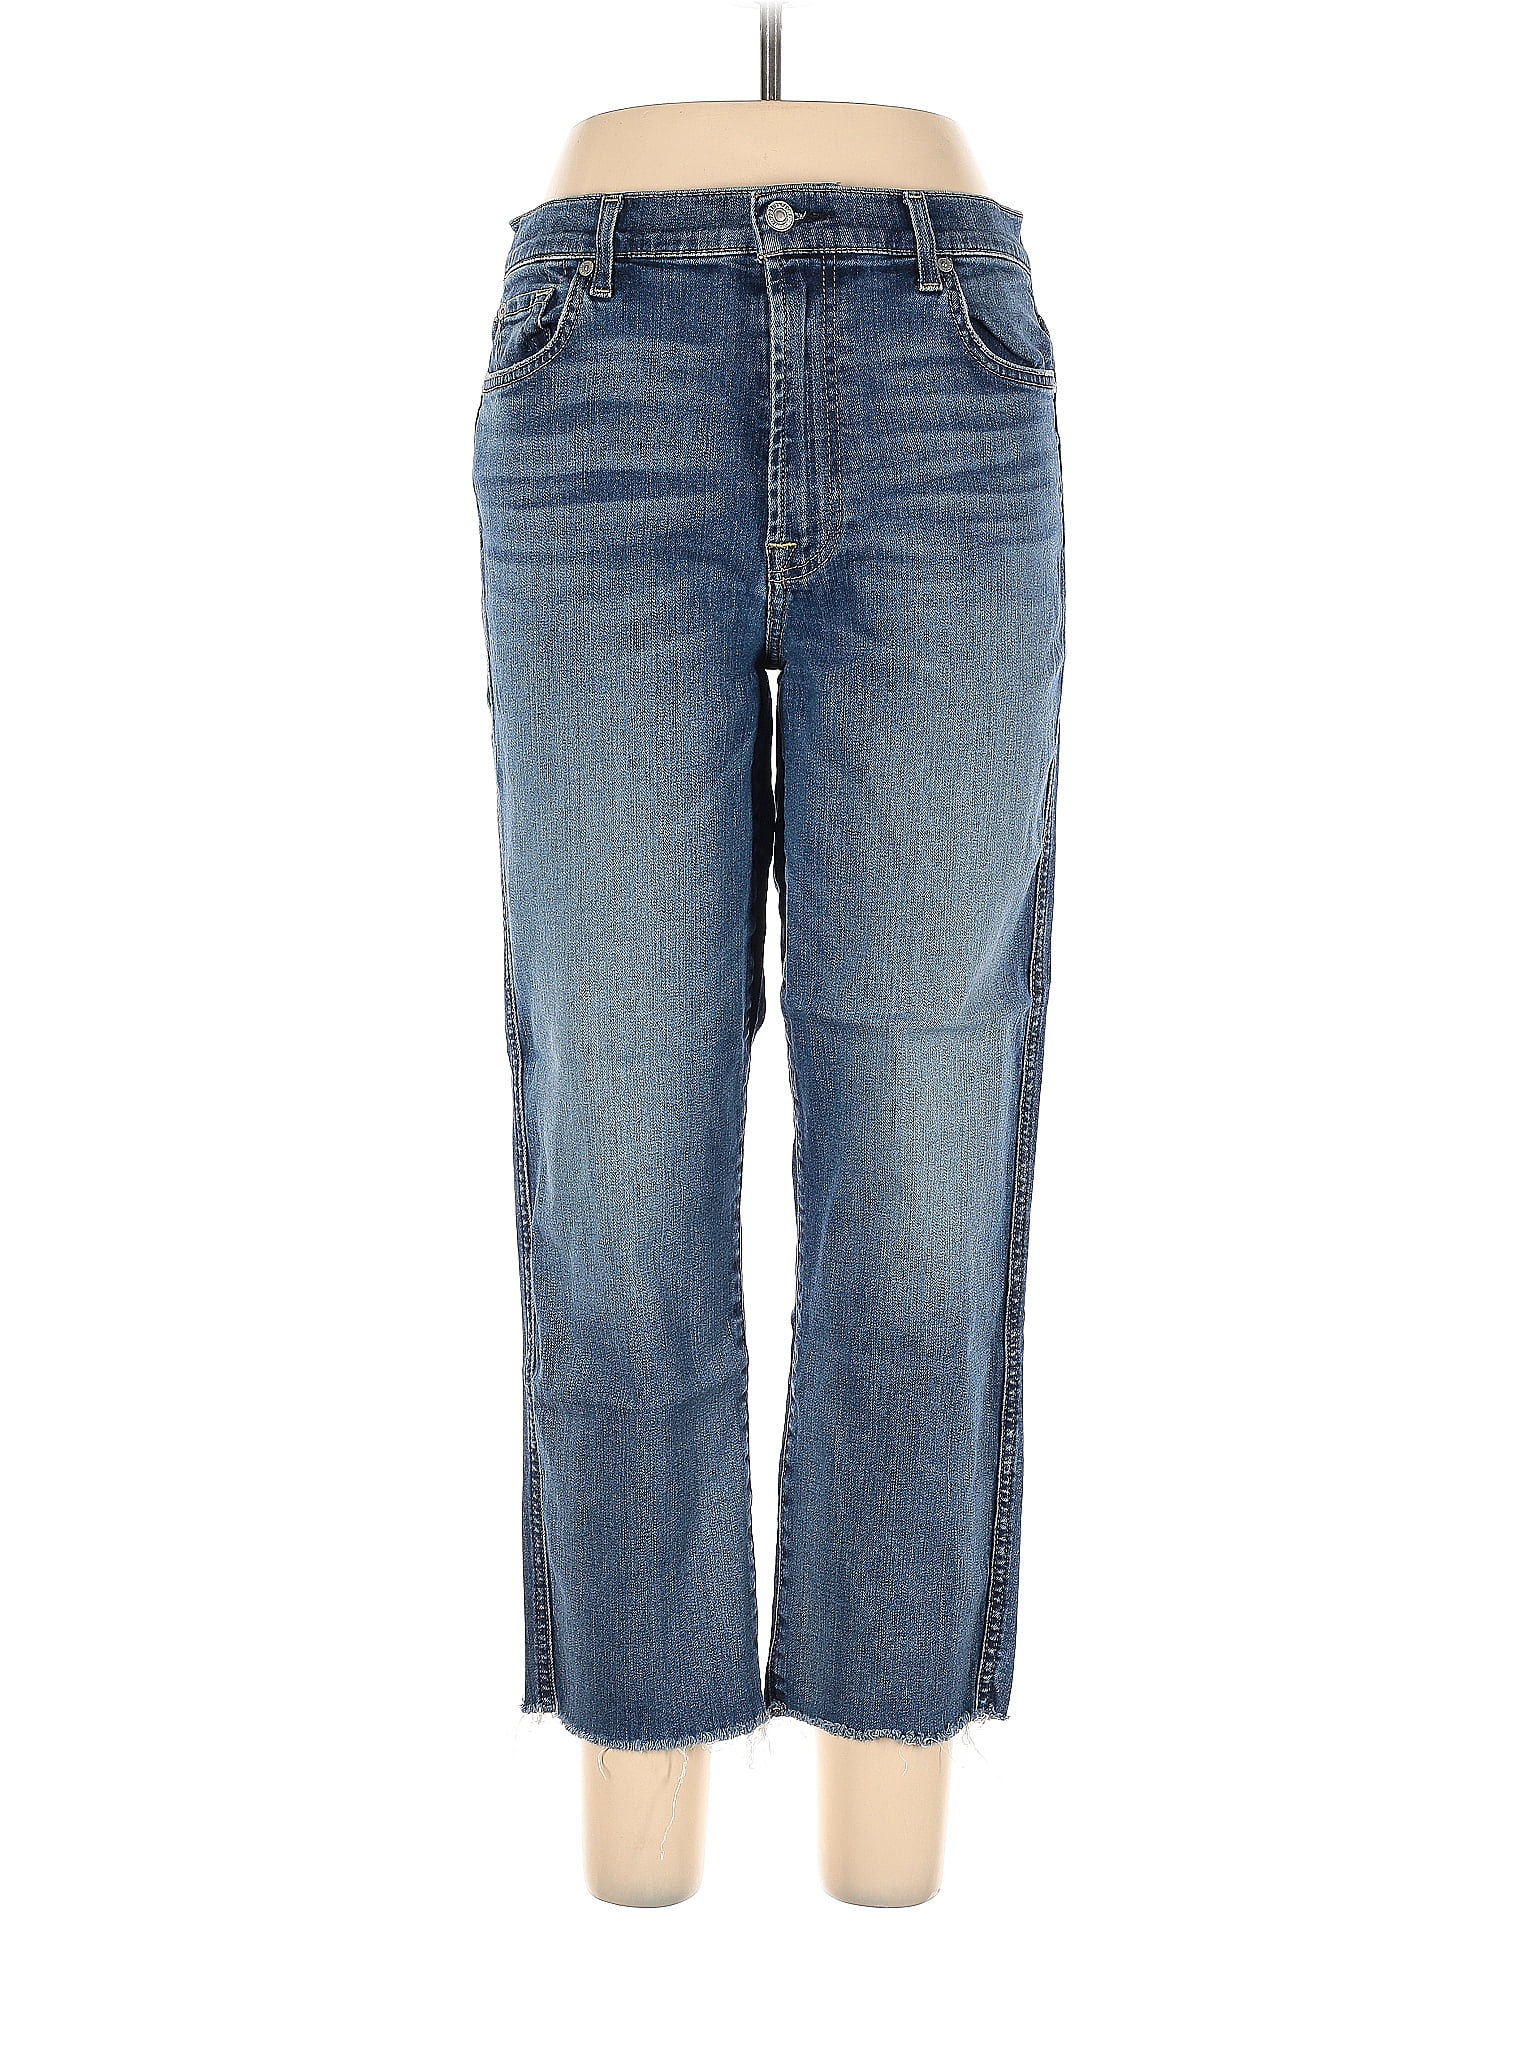 7 For All Mankind Solid Blue Jeans 31 Waist - 79% off | thredUP